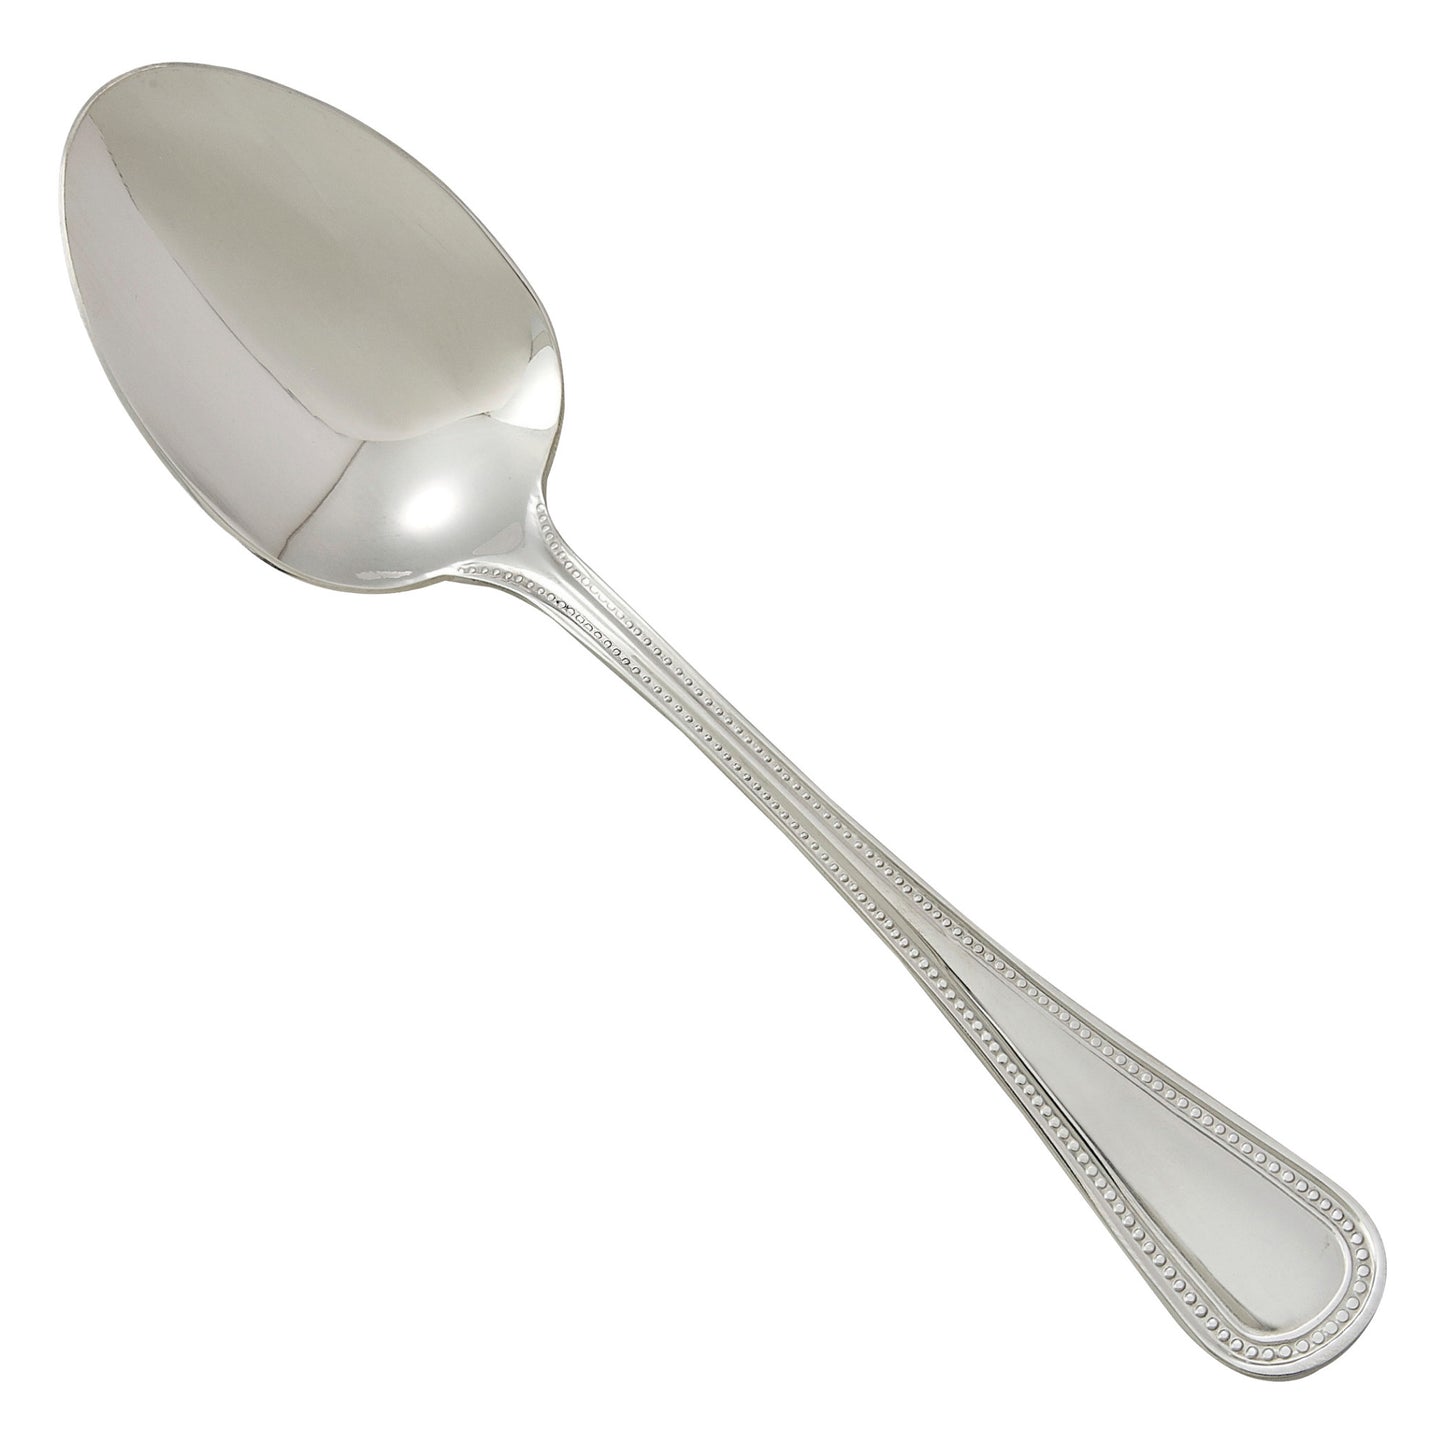 0036-10 - Deluxe Pearl Tablespoon, 18/8 Extra Heavyweight